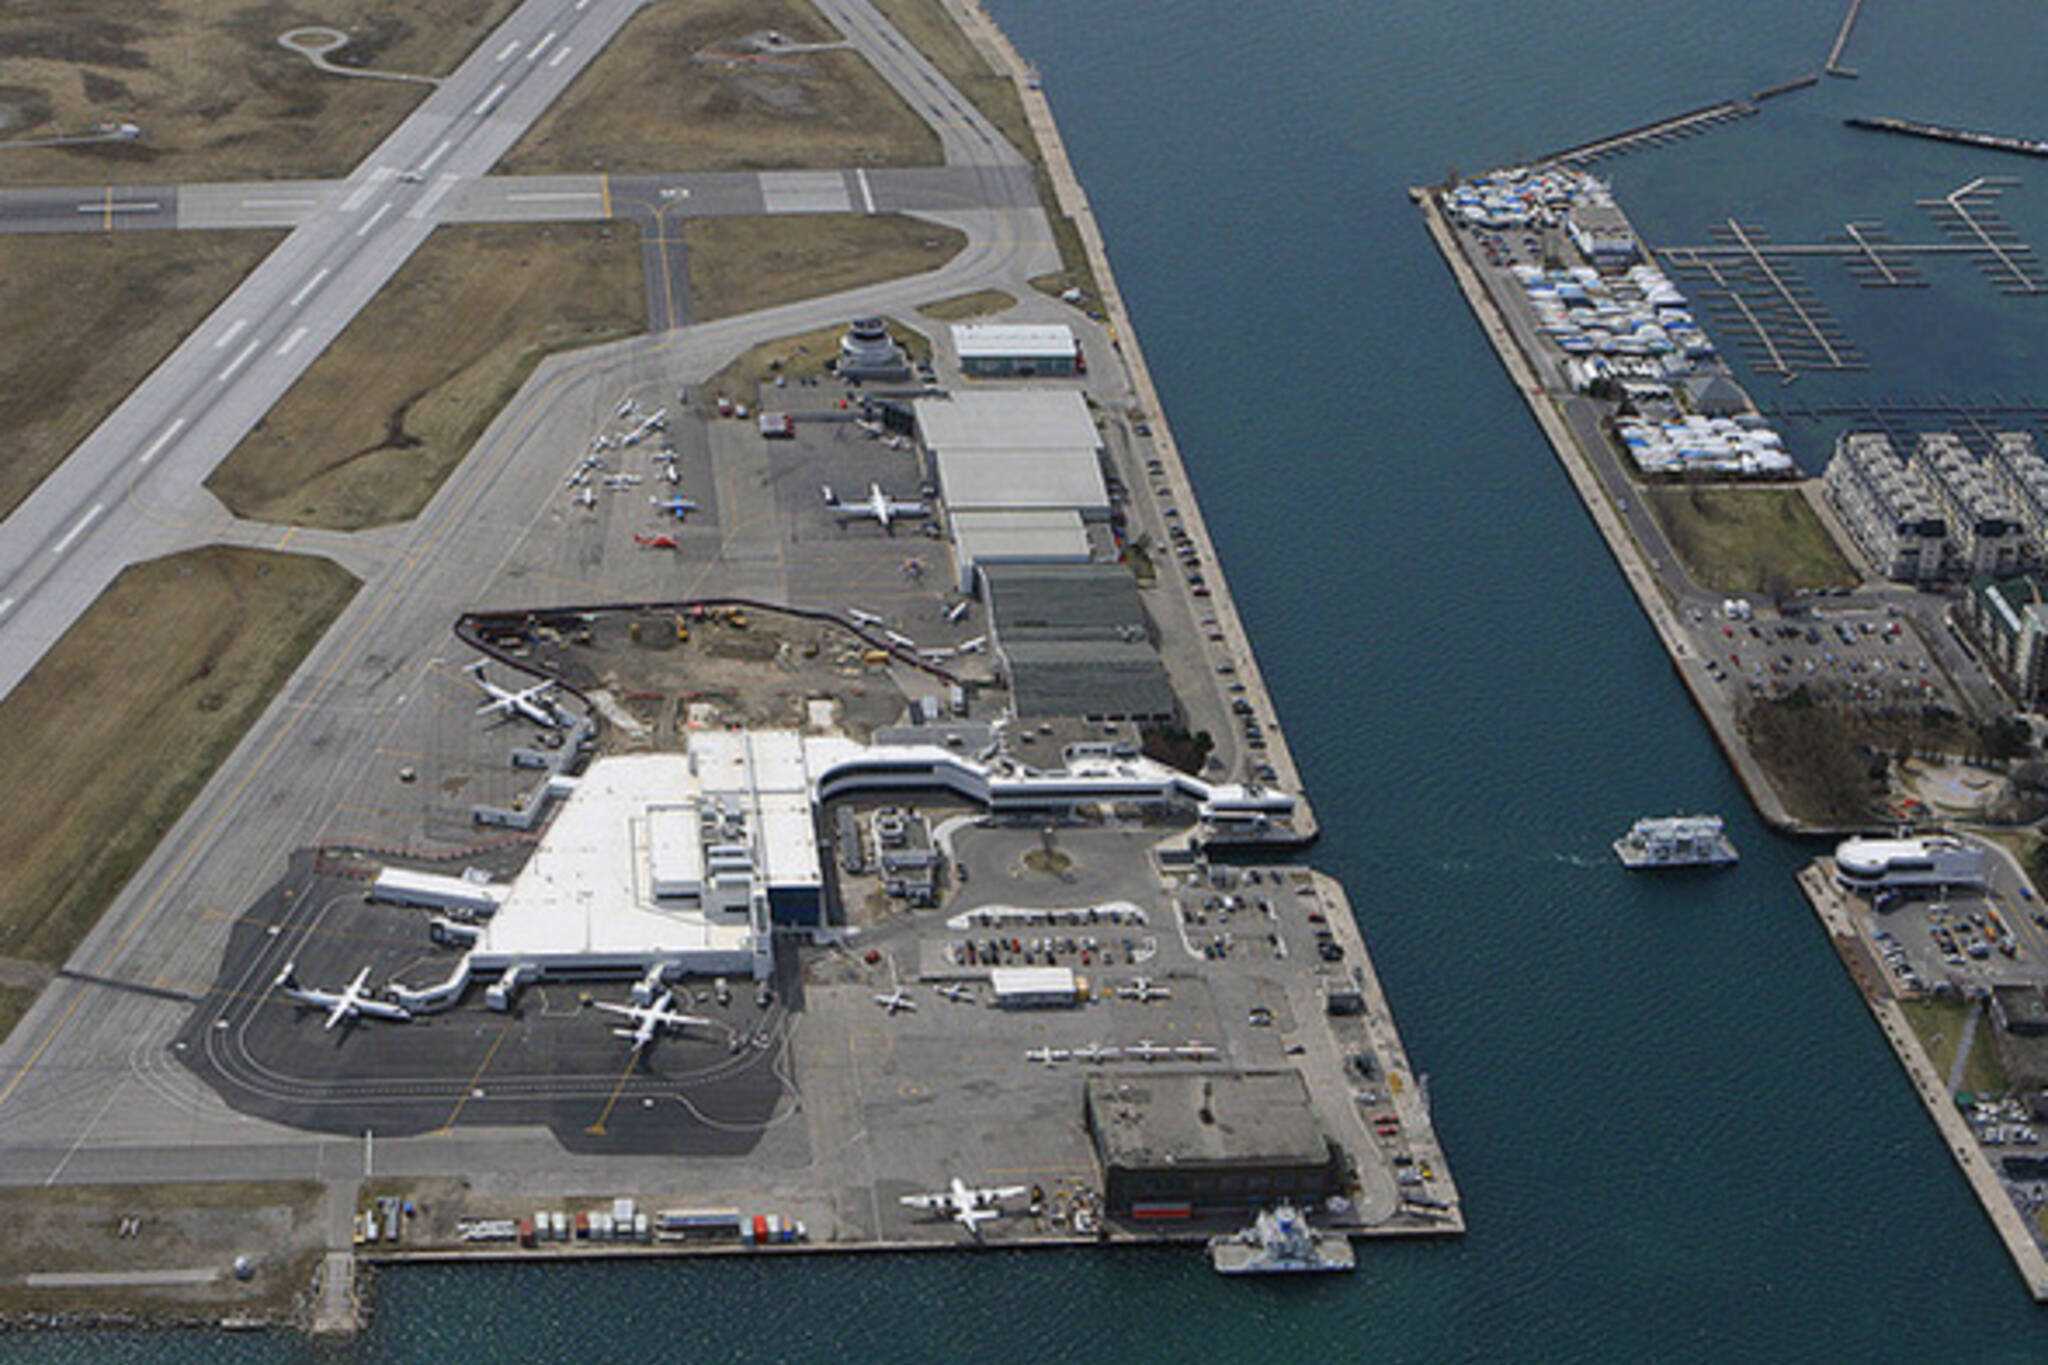 Porter Island Airport Expansion